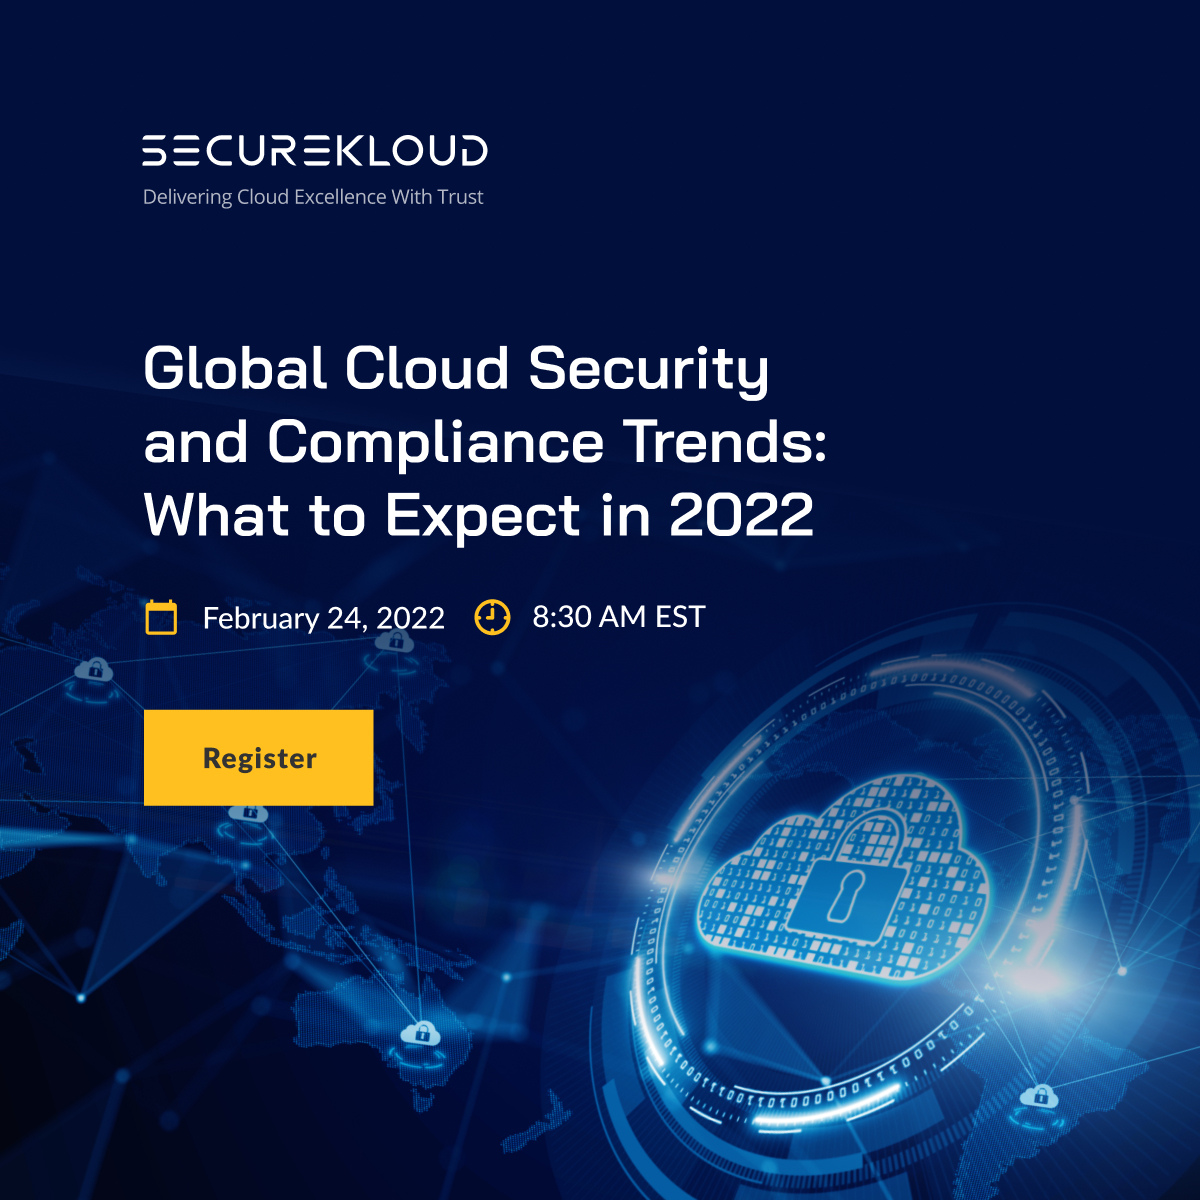 Global Cloud Security and Compliance Trends, Online Event